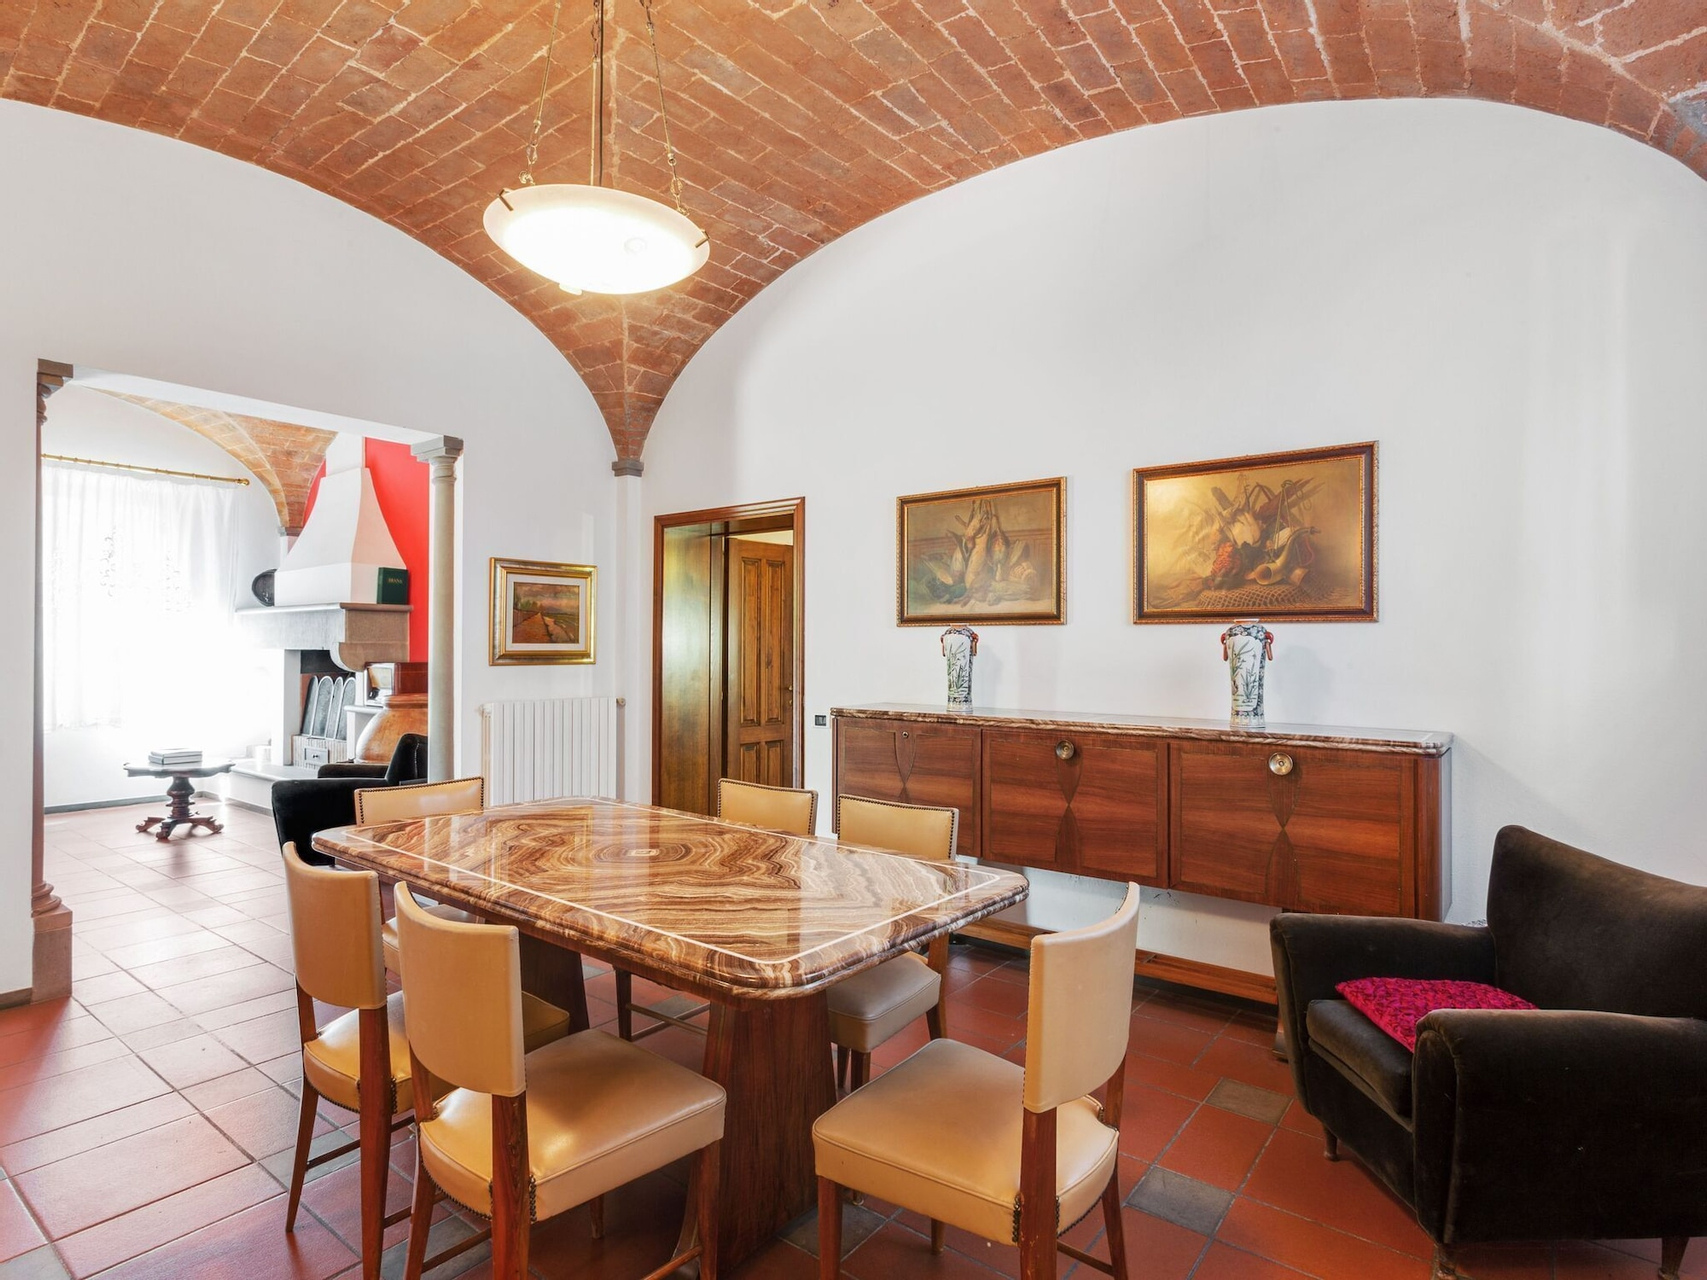 Food & Drinks, Spacious Villa in Empoli with Swimming Pool, Florence